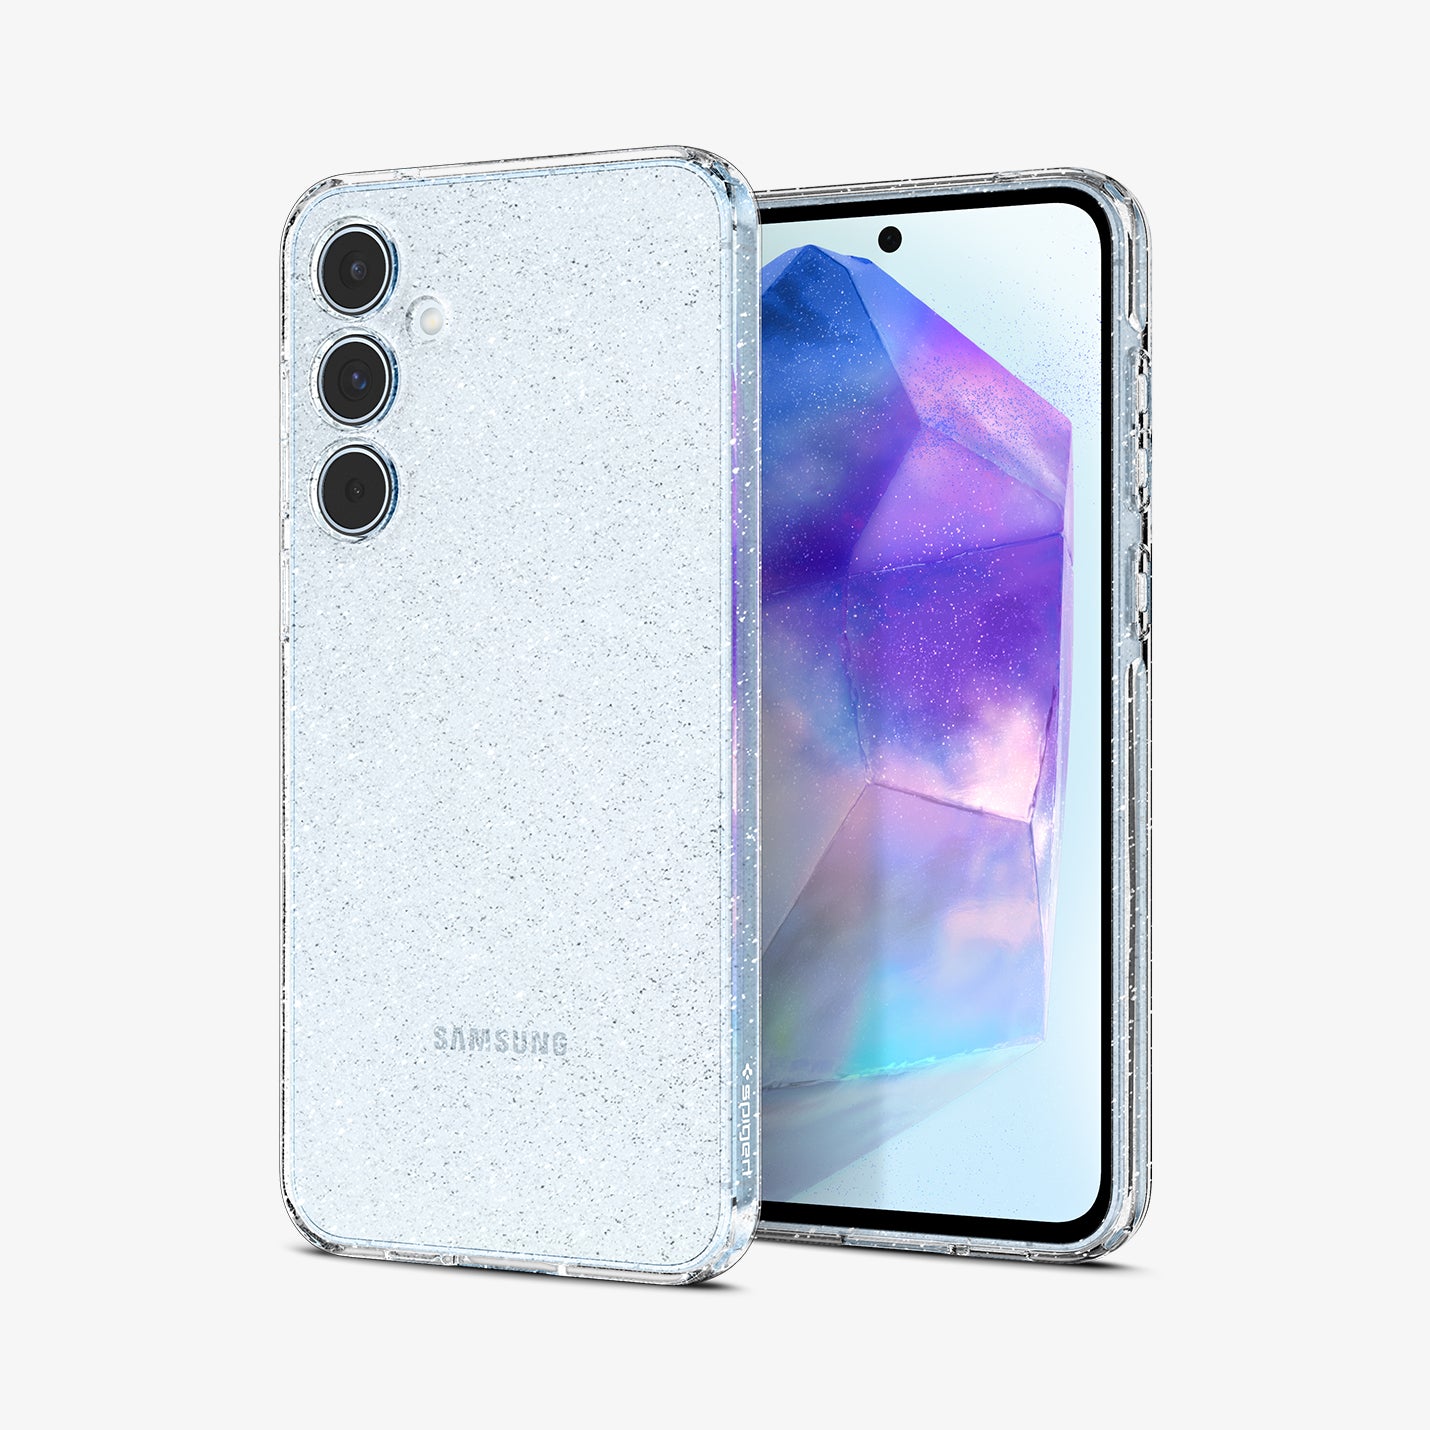 ACS07538 - Galaxy A55 5G Case Liquid Crystal Glitter in Crystal Quartz showing the back, partial front and sides